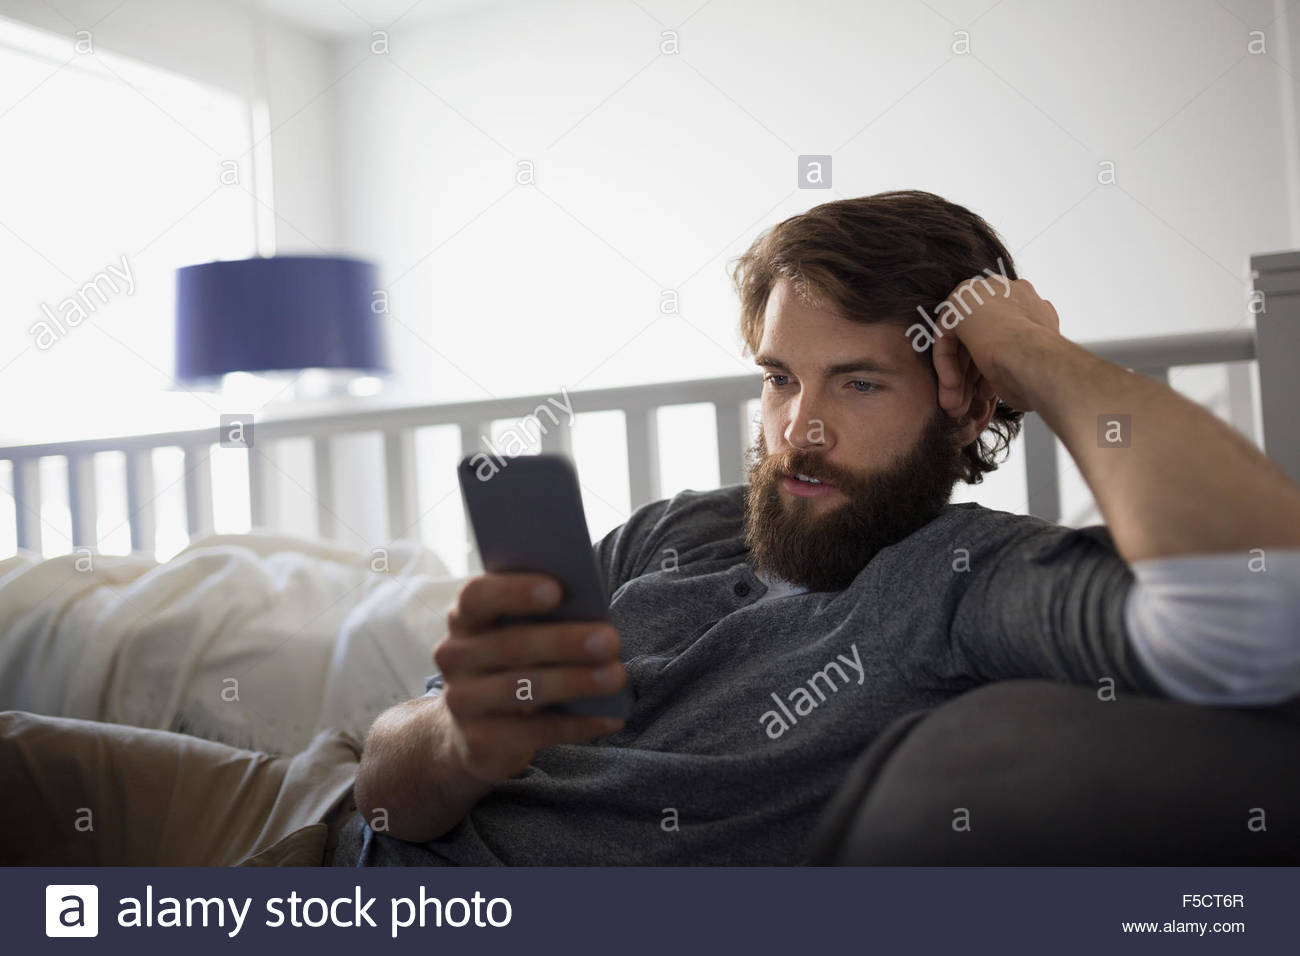 Man texting with cell phone on sofa Stock Photo